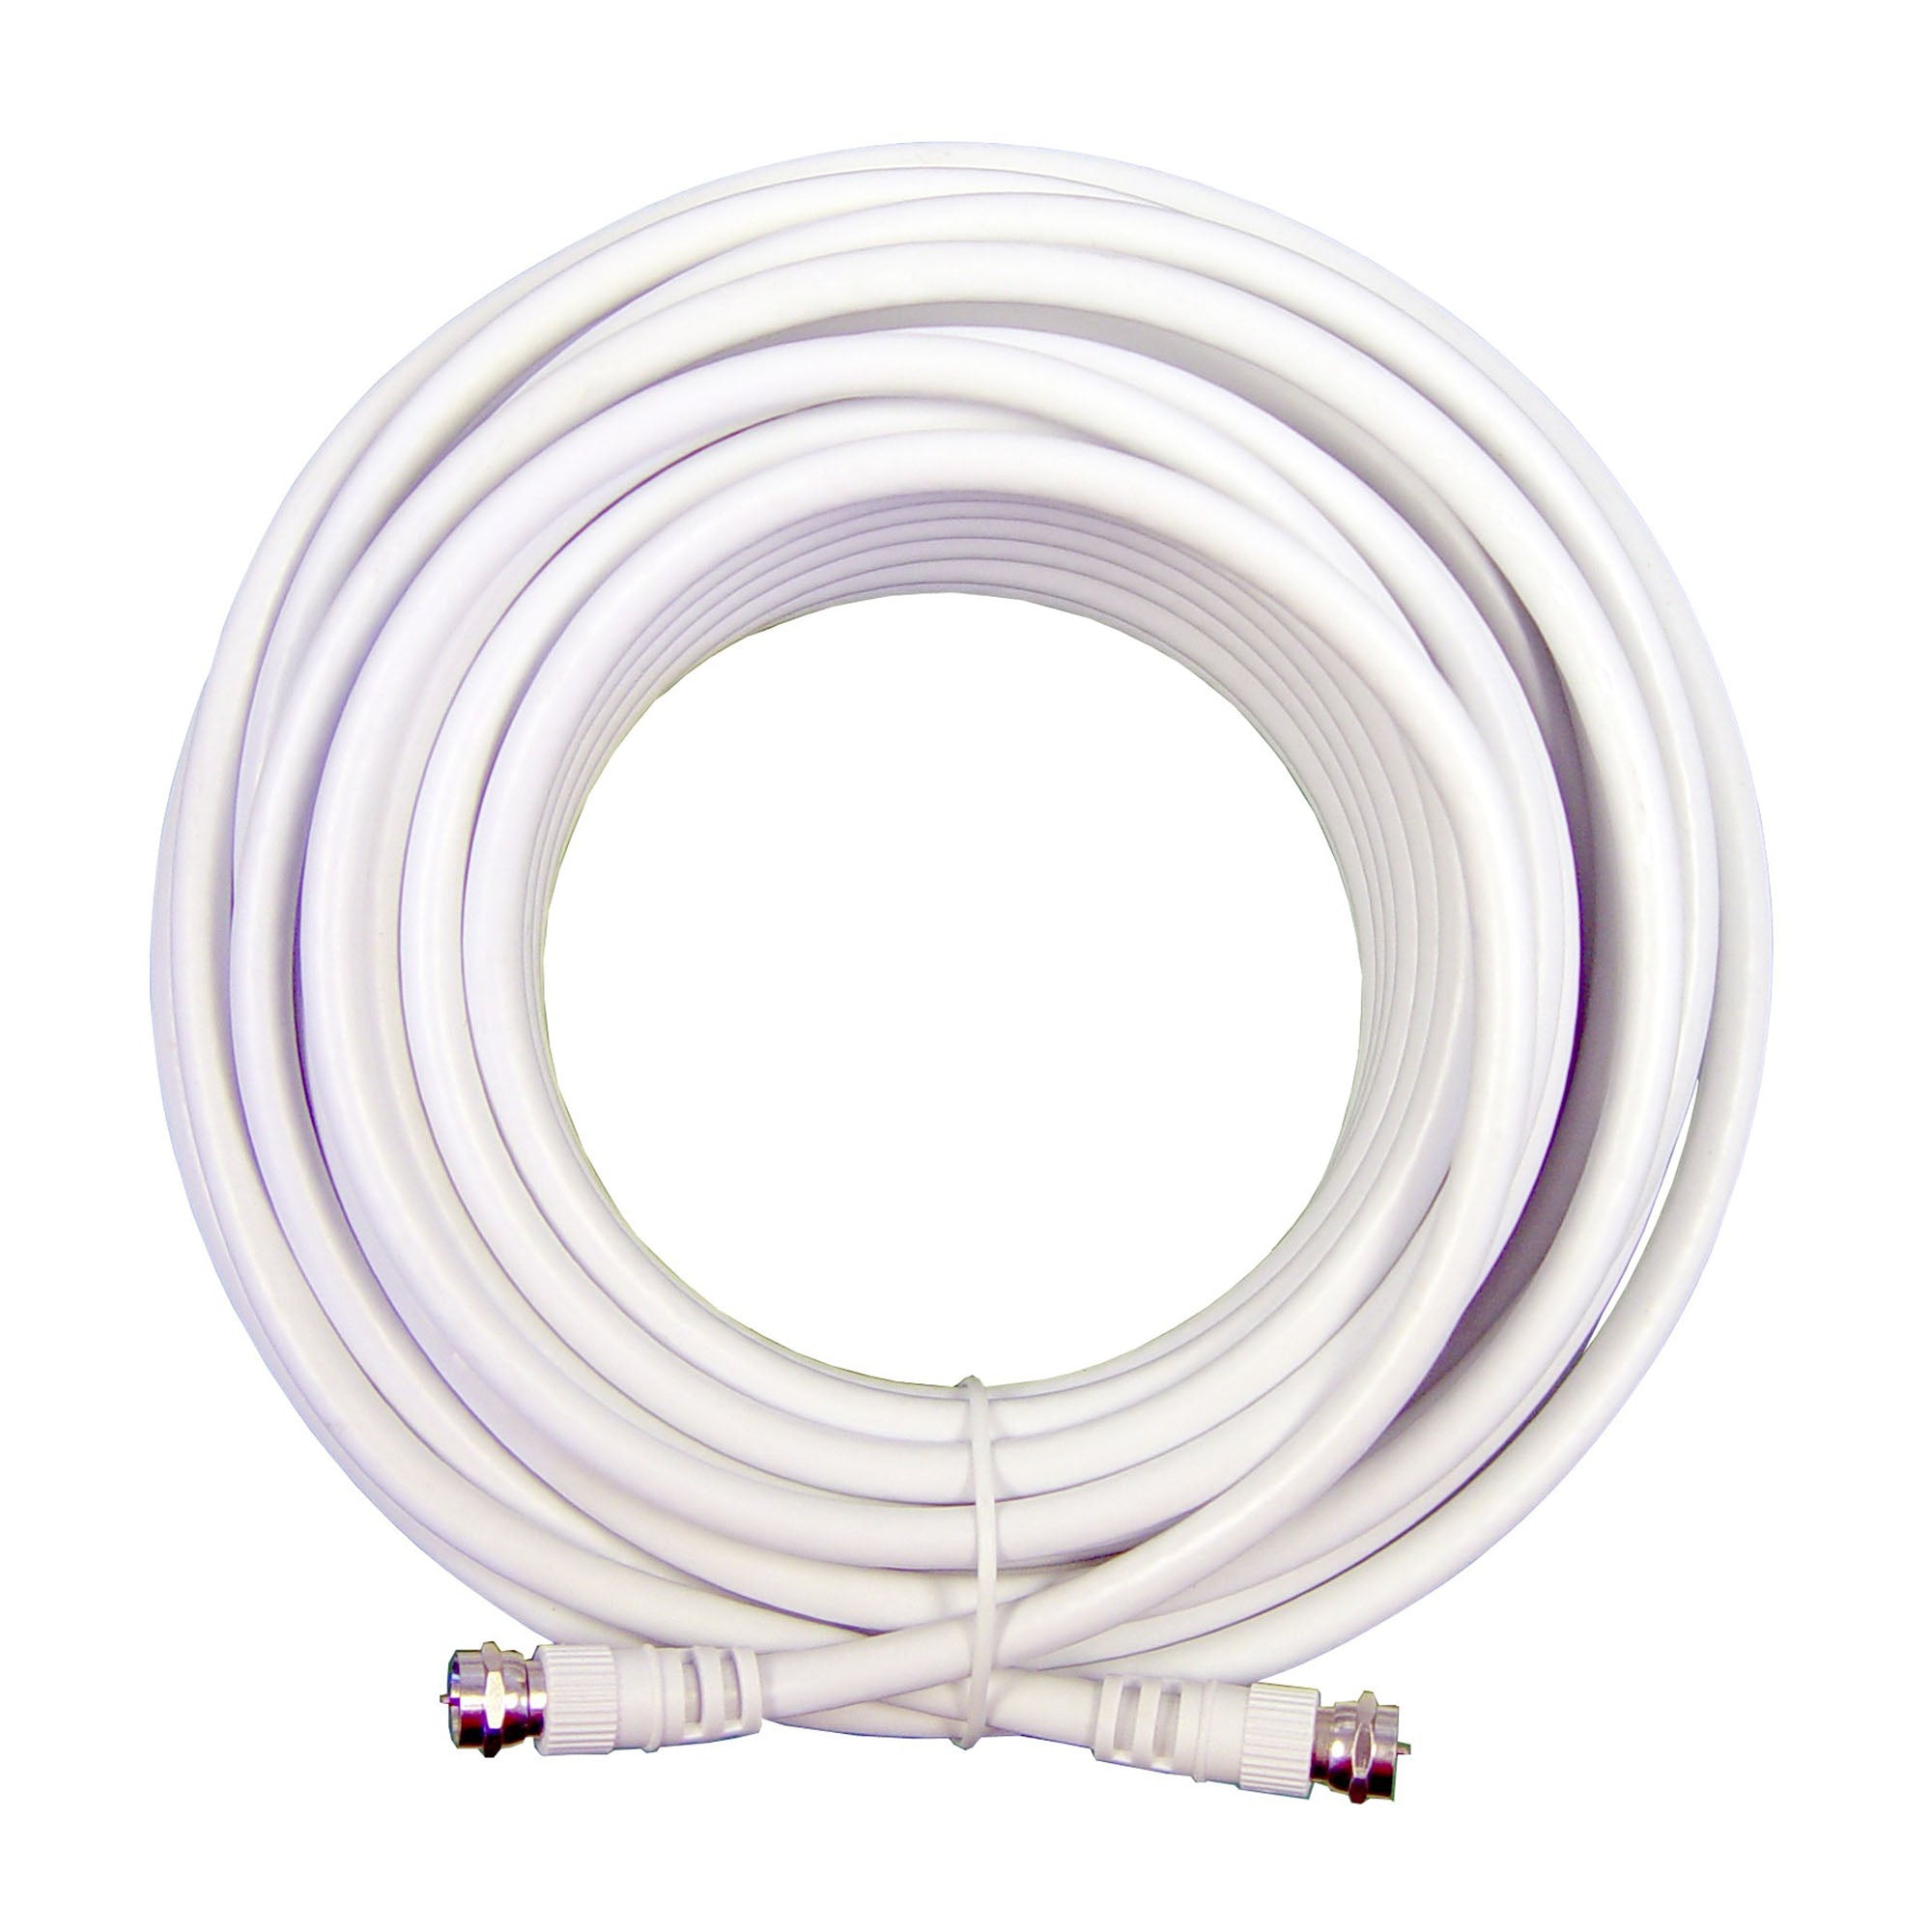 Wilson Cable 30 ft. white RG6 low loss coax cable - 670WI950630